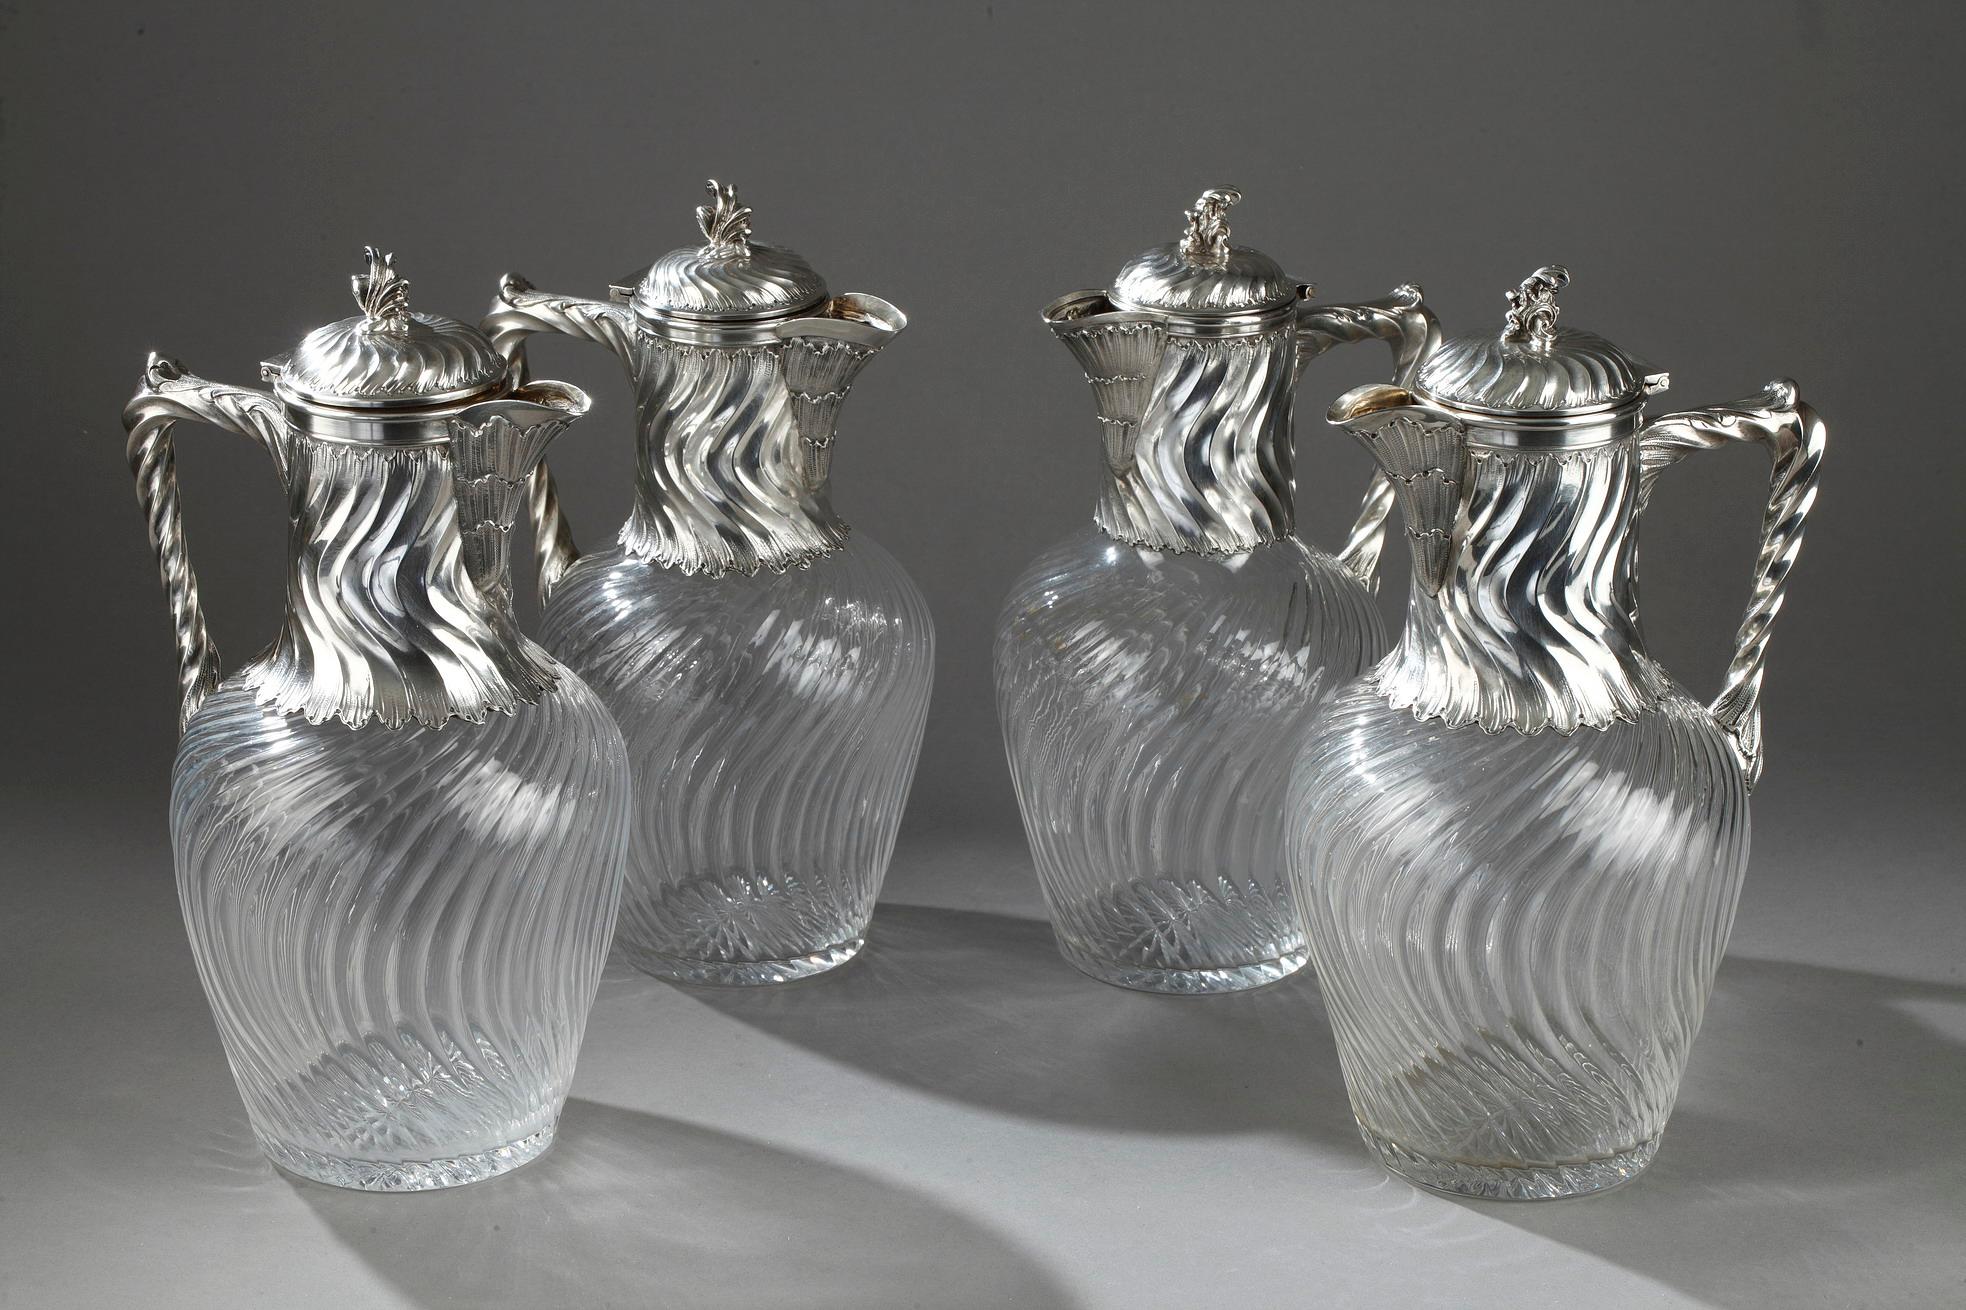 Set of four ewers in crystal cut with twisted ribs and silver mount. Every ewer has a relief wave design at the neck, a shell beak and twisted handle. The hinged lid is decorated with a flower-shaped grip.

Size of 2 ewers (1st pair)
H 22.5 cm
P